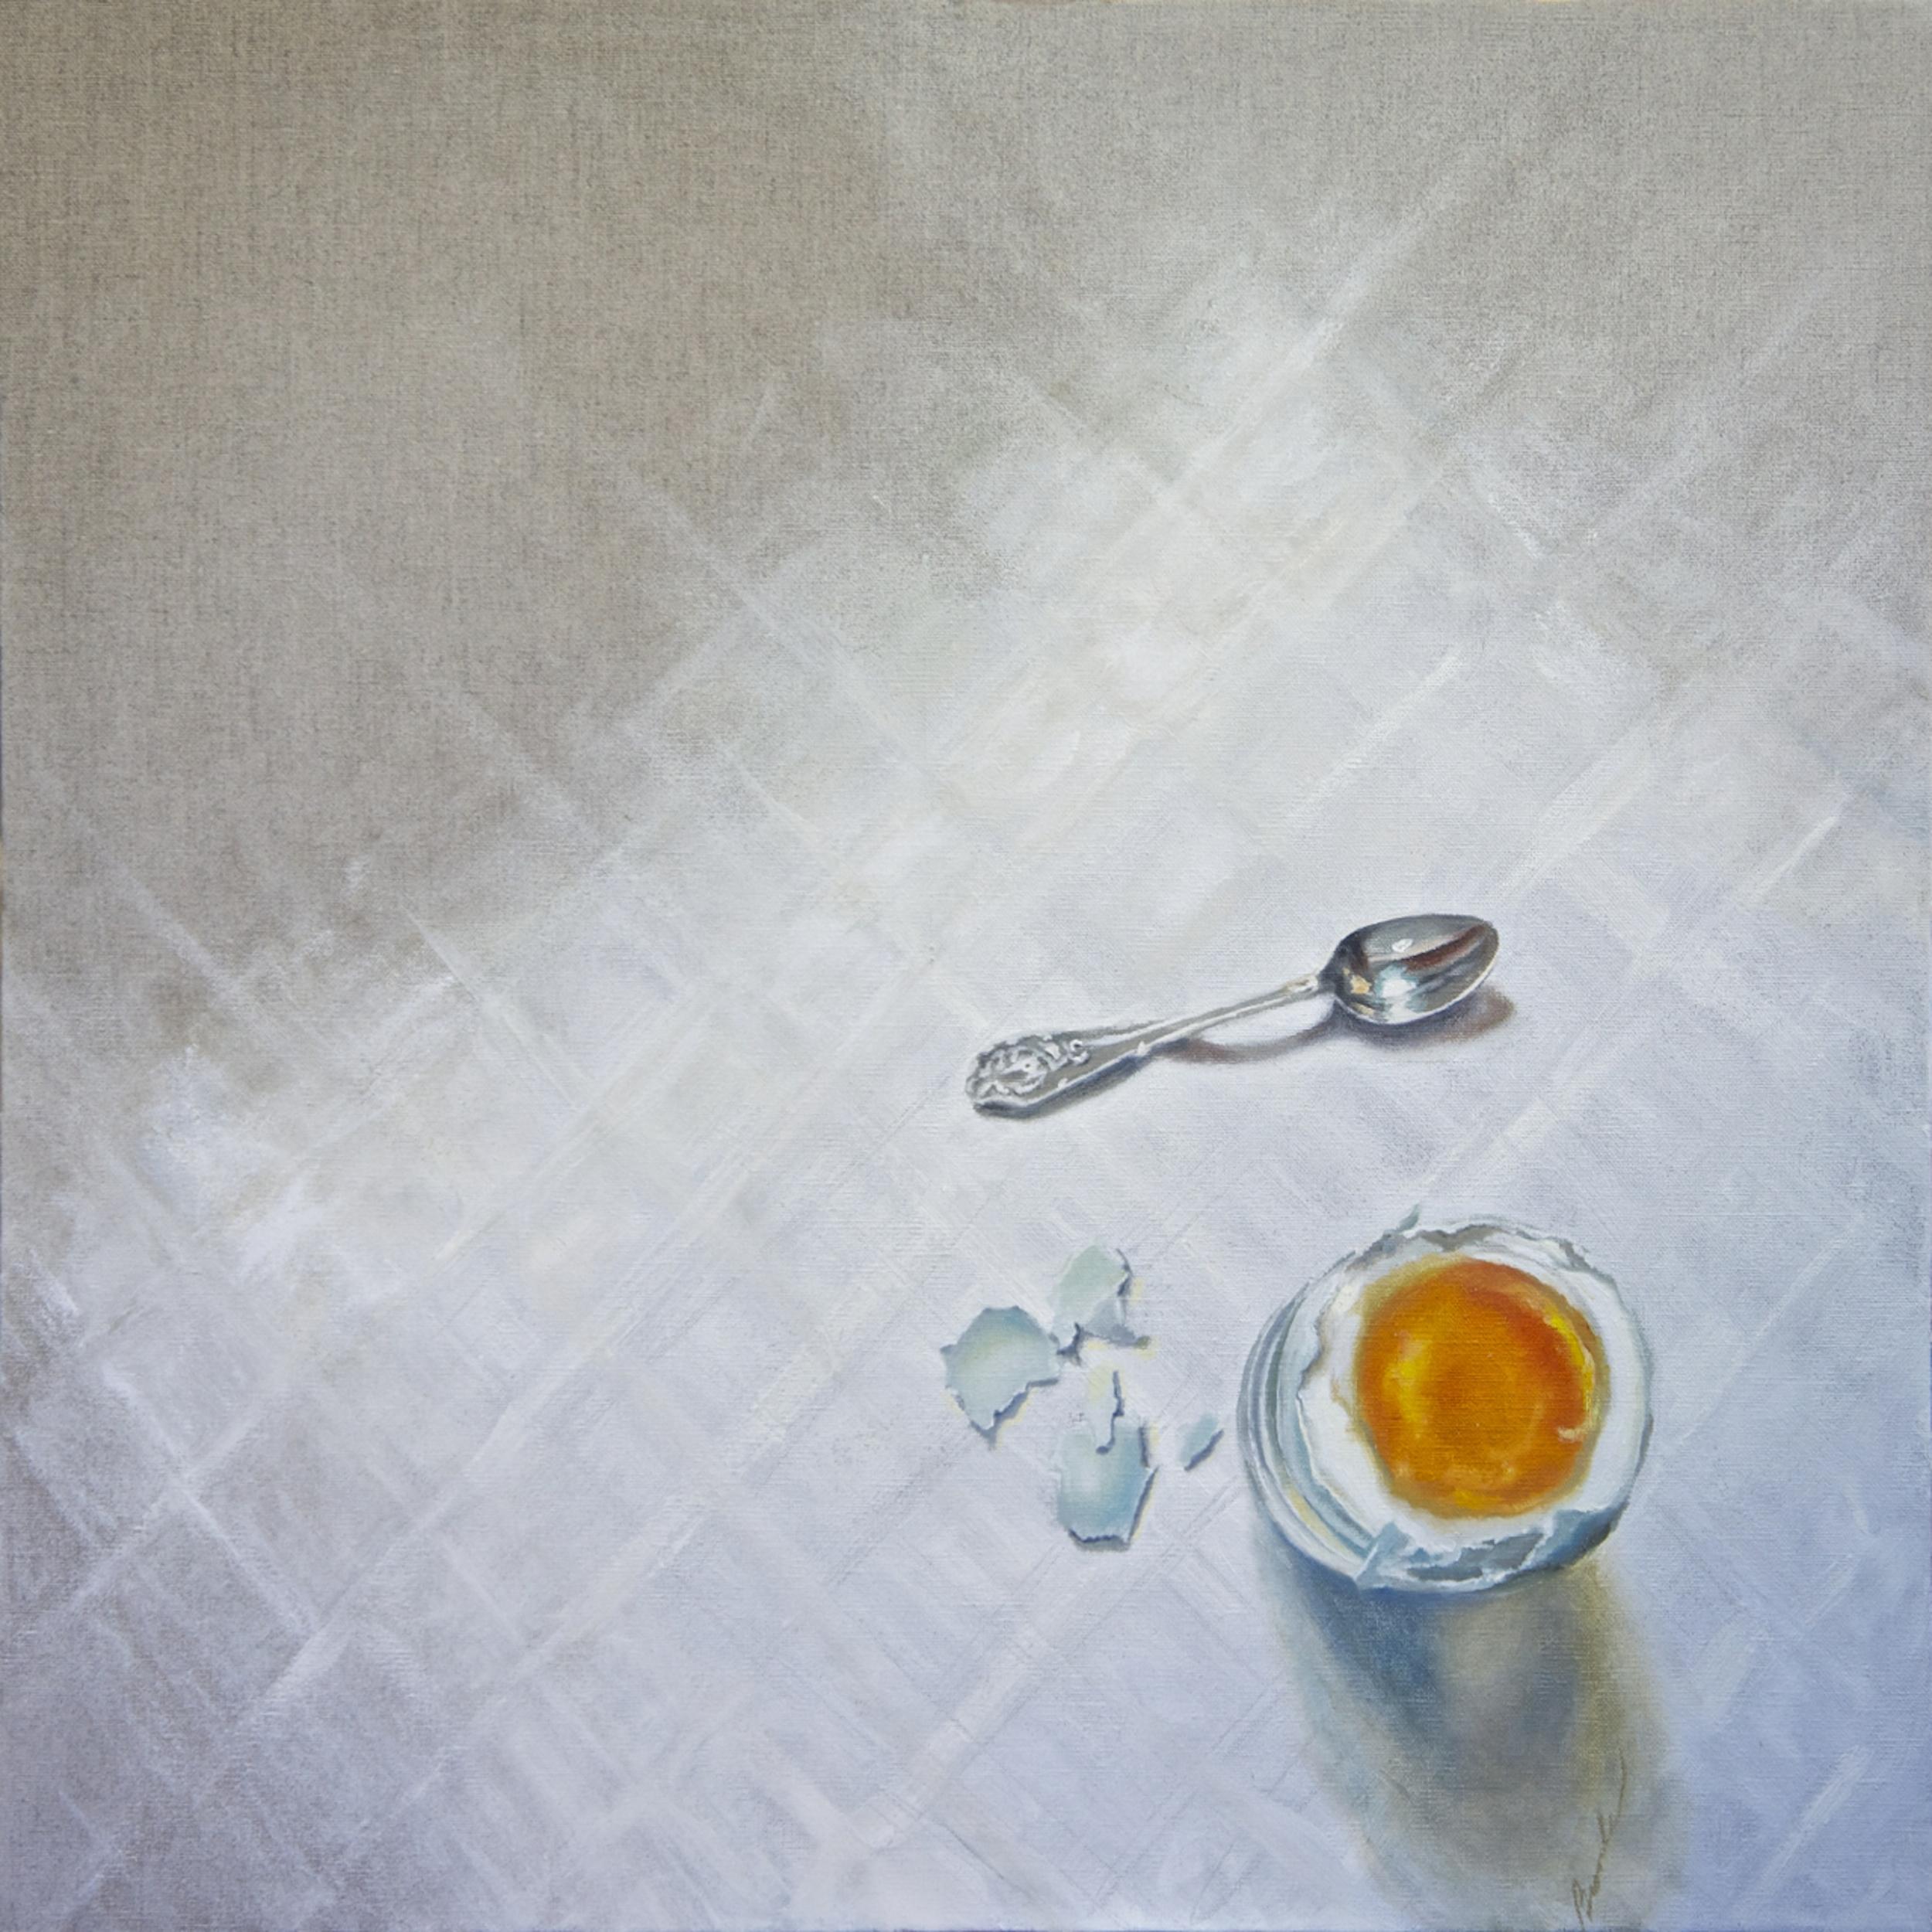 Soft-boiled blue Araucana chicken egg in a glass cup, cracked eggshell pieces below; an antique silver spoon next to it, all on a white windowpane cloth on natural linen background. :: Painting :: Realism :: This piece comes with an official